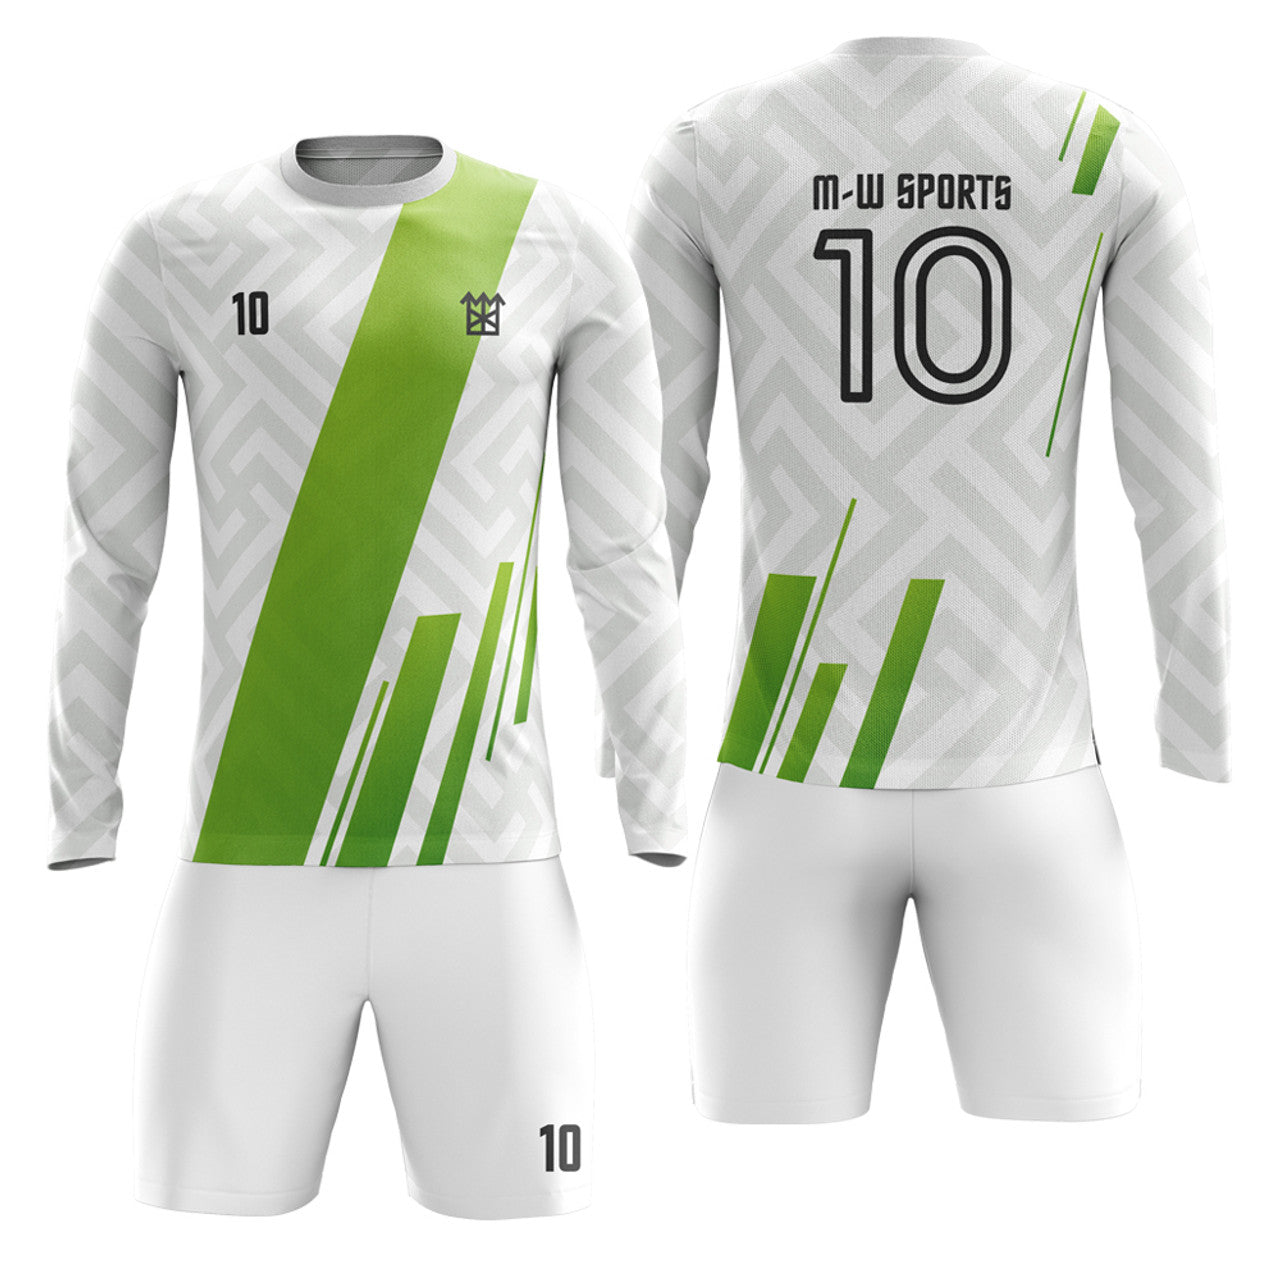 Custom Long Sleeve Soccer Shirt Football Goalkeeper Jersey with your name, number and logo.